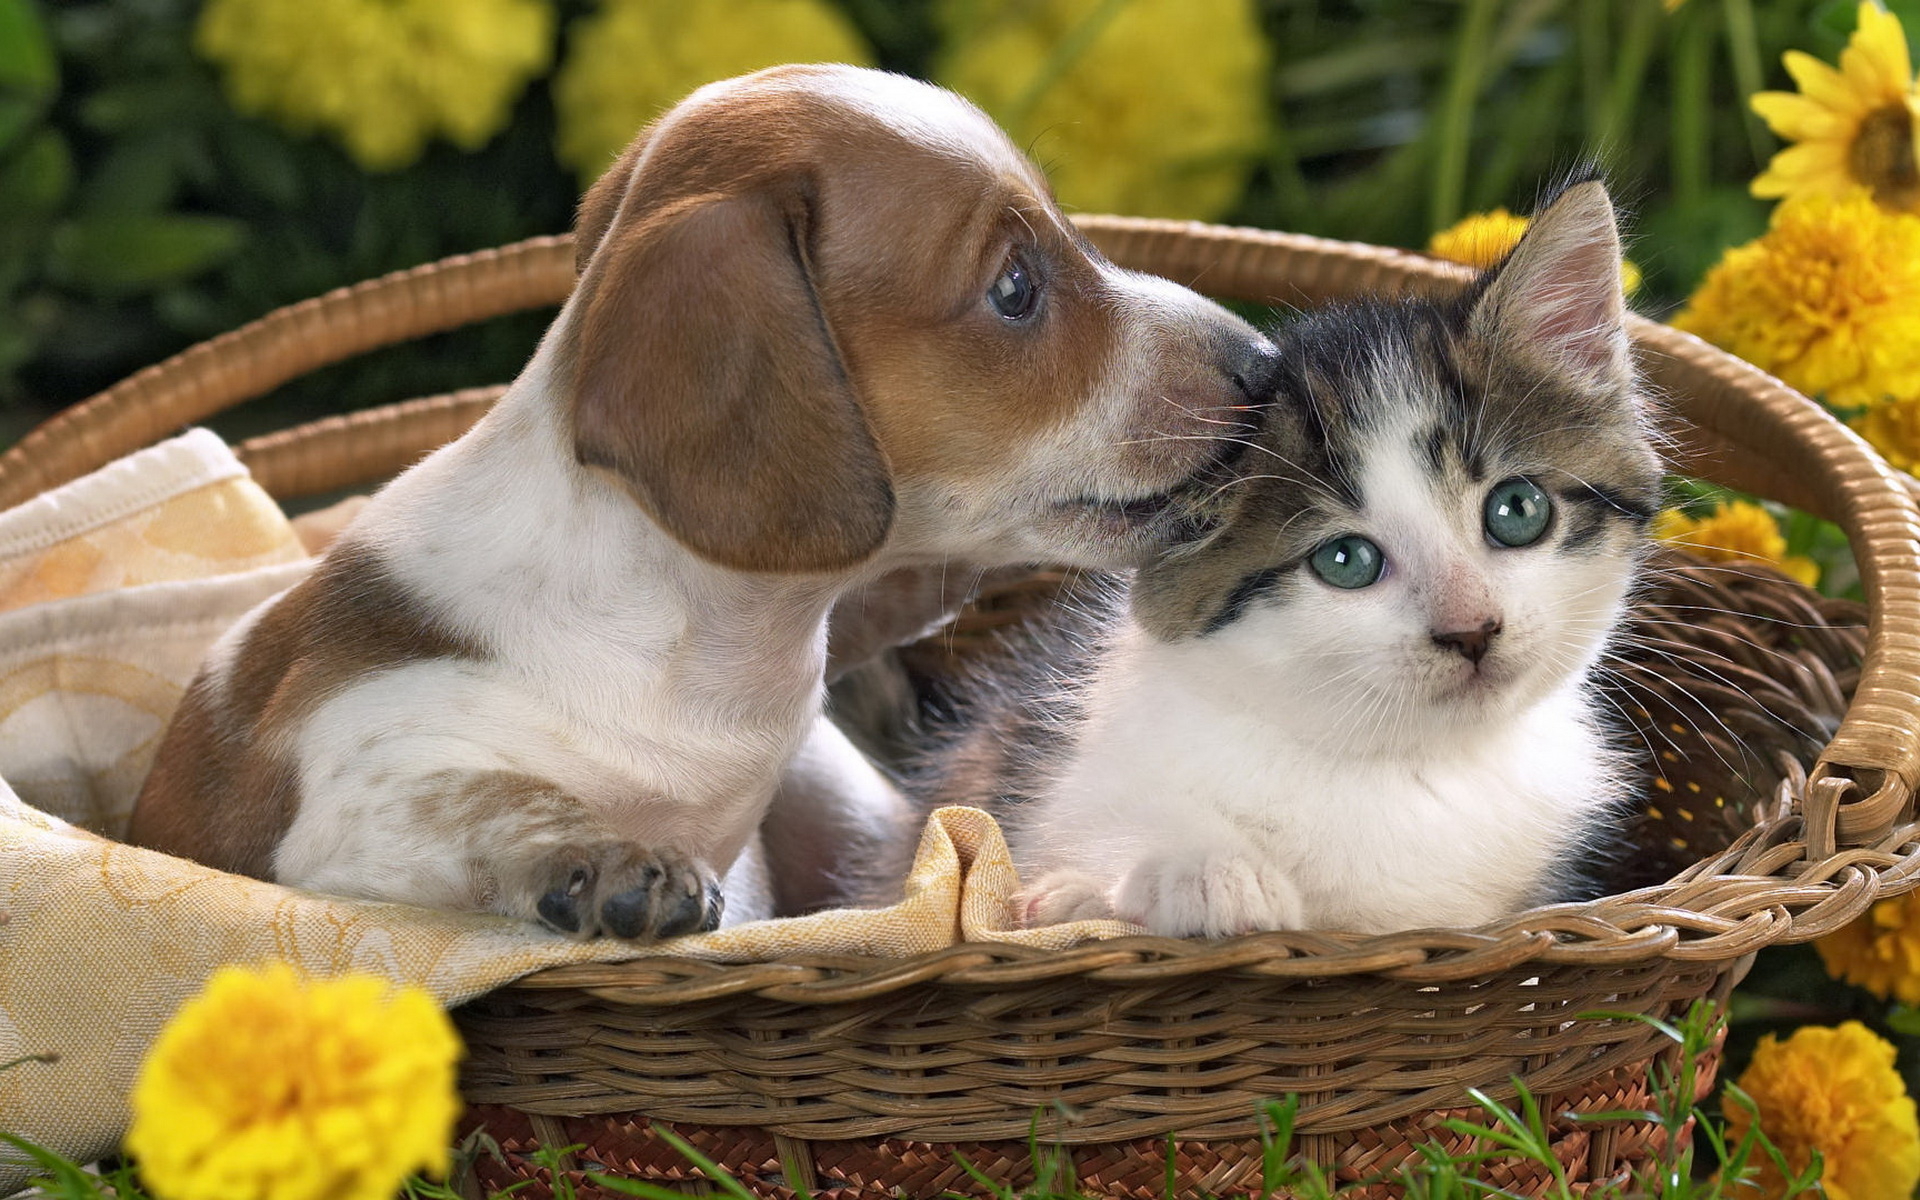 Puppy and kitten wallpapers and images wallpapers, pictures, photos